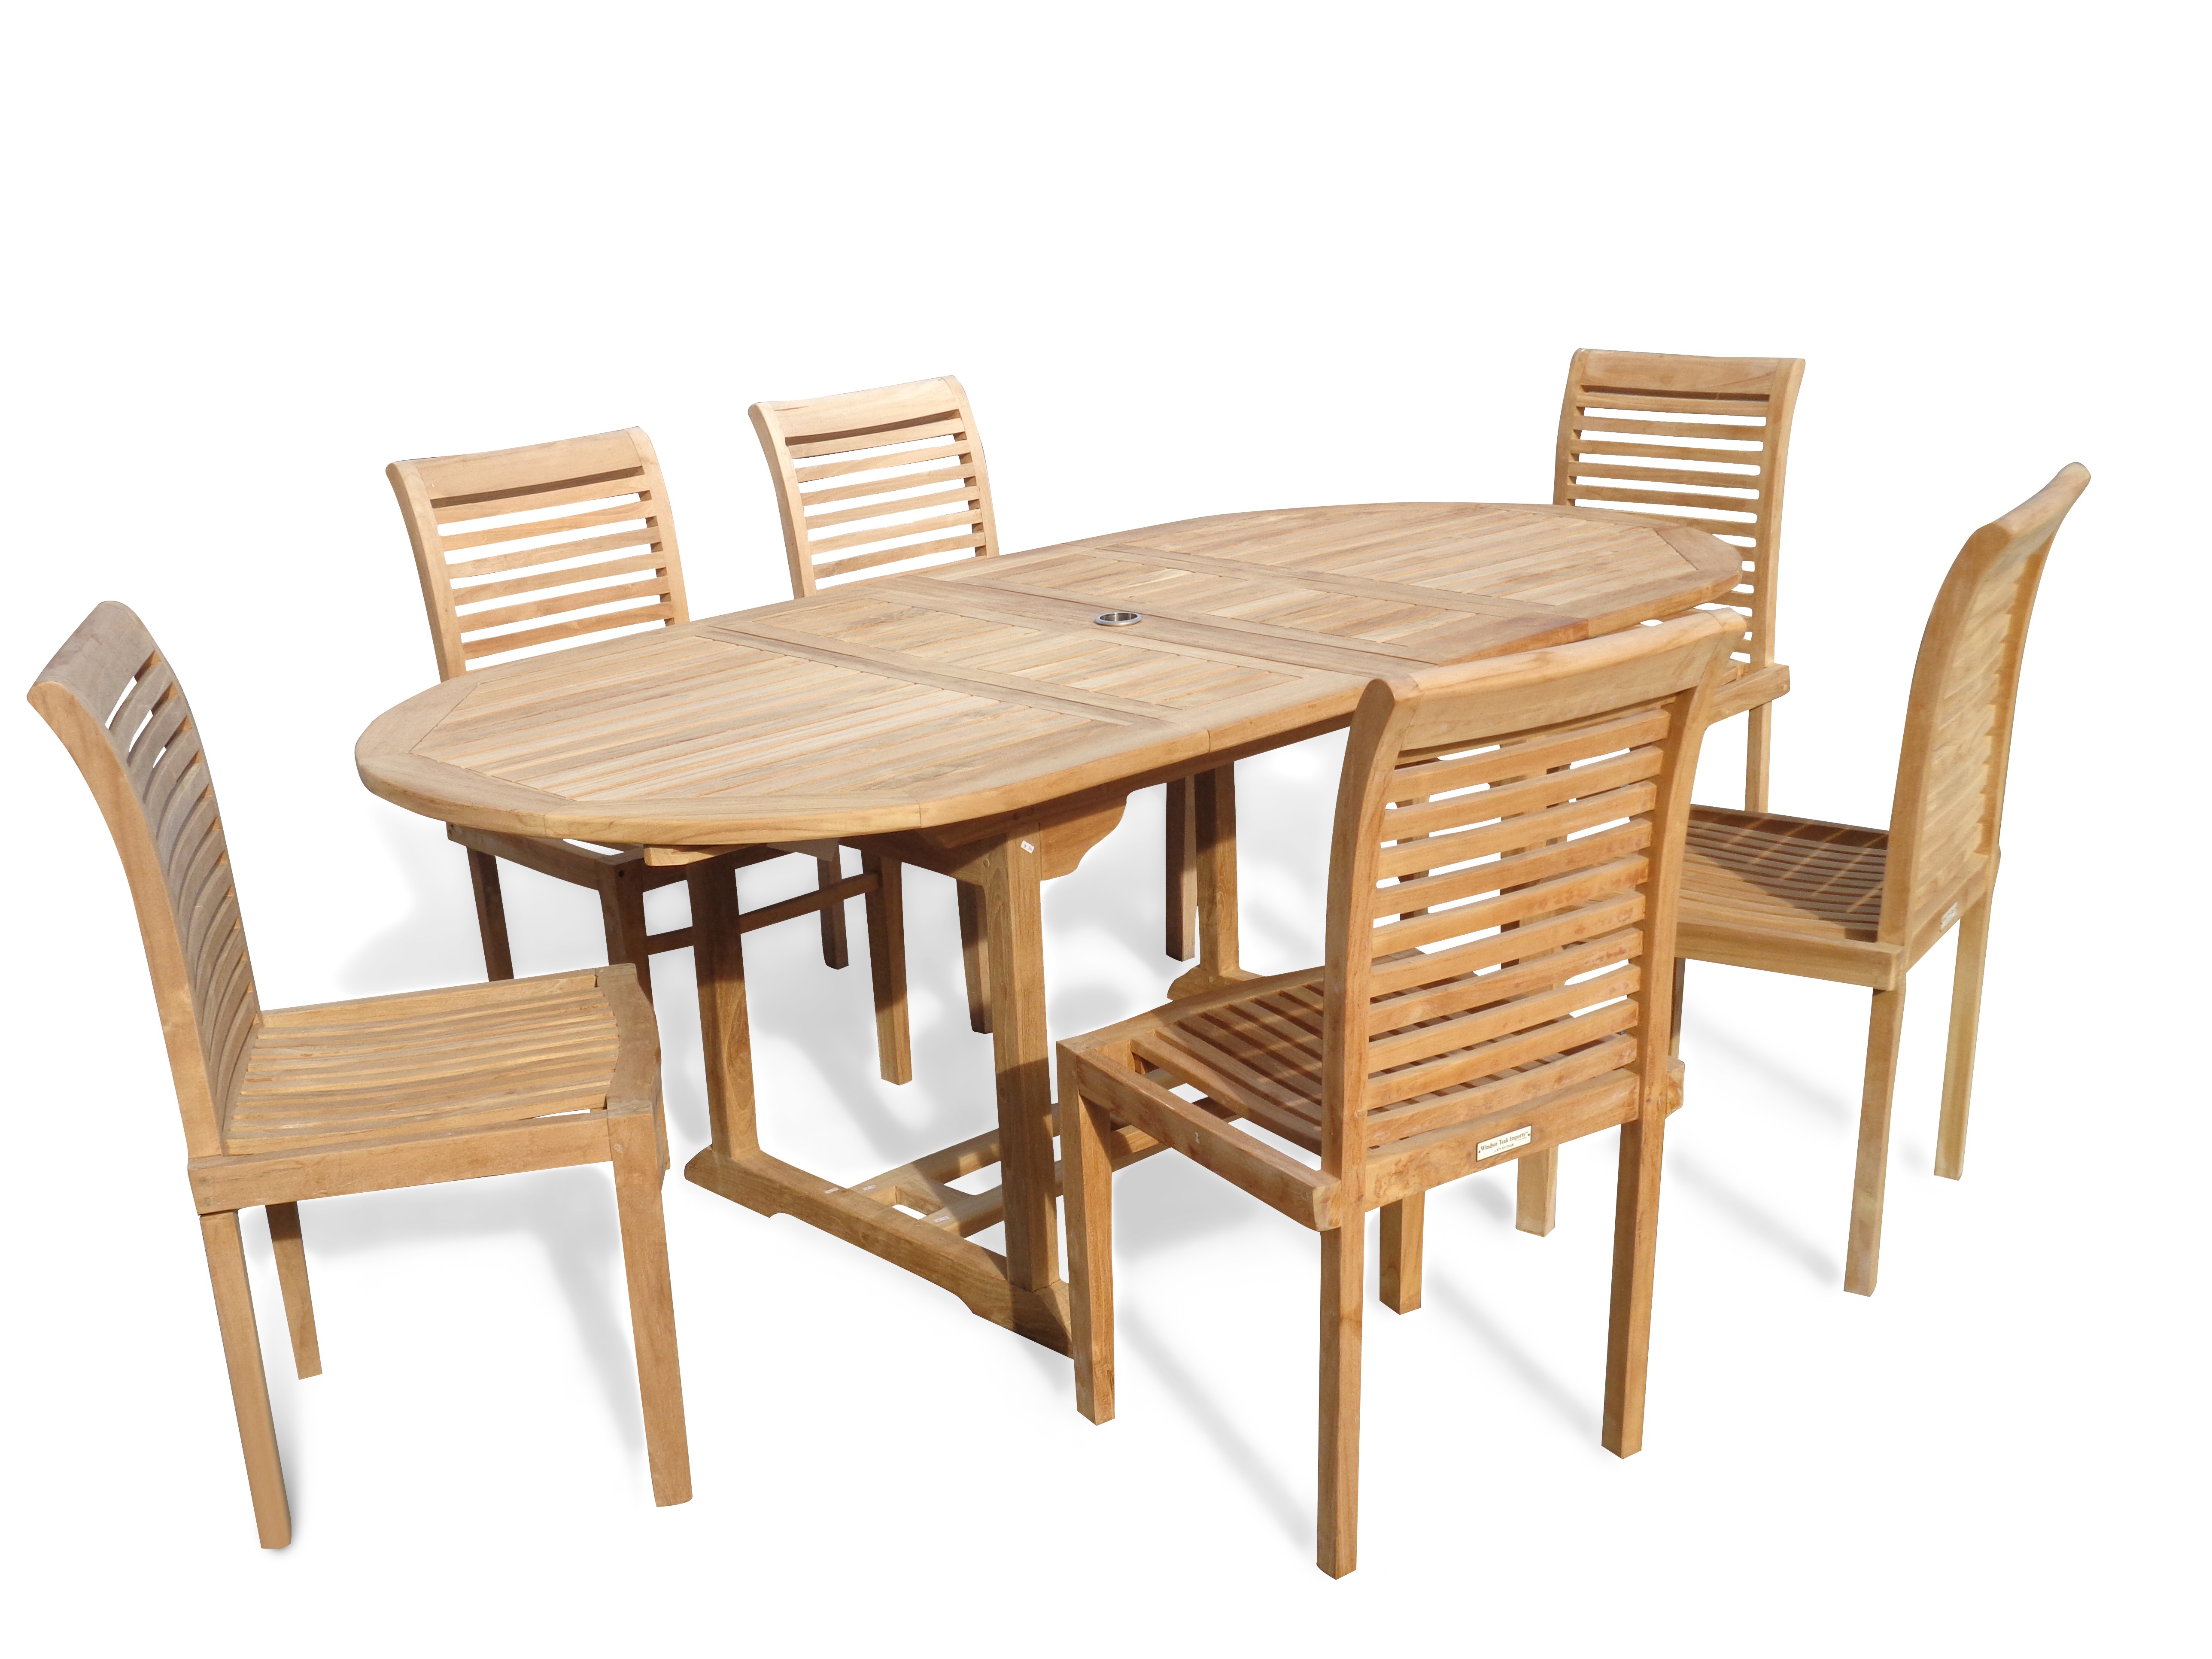 Buckingham 82" x 39" Double Leaf Oval Extension Teak Table W/6 Casa Blanca Armless Stacking Chairs.